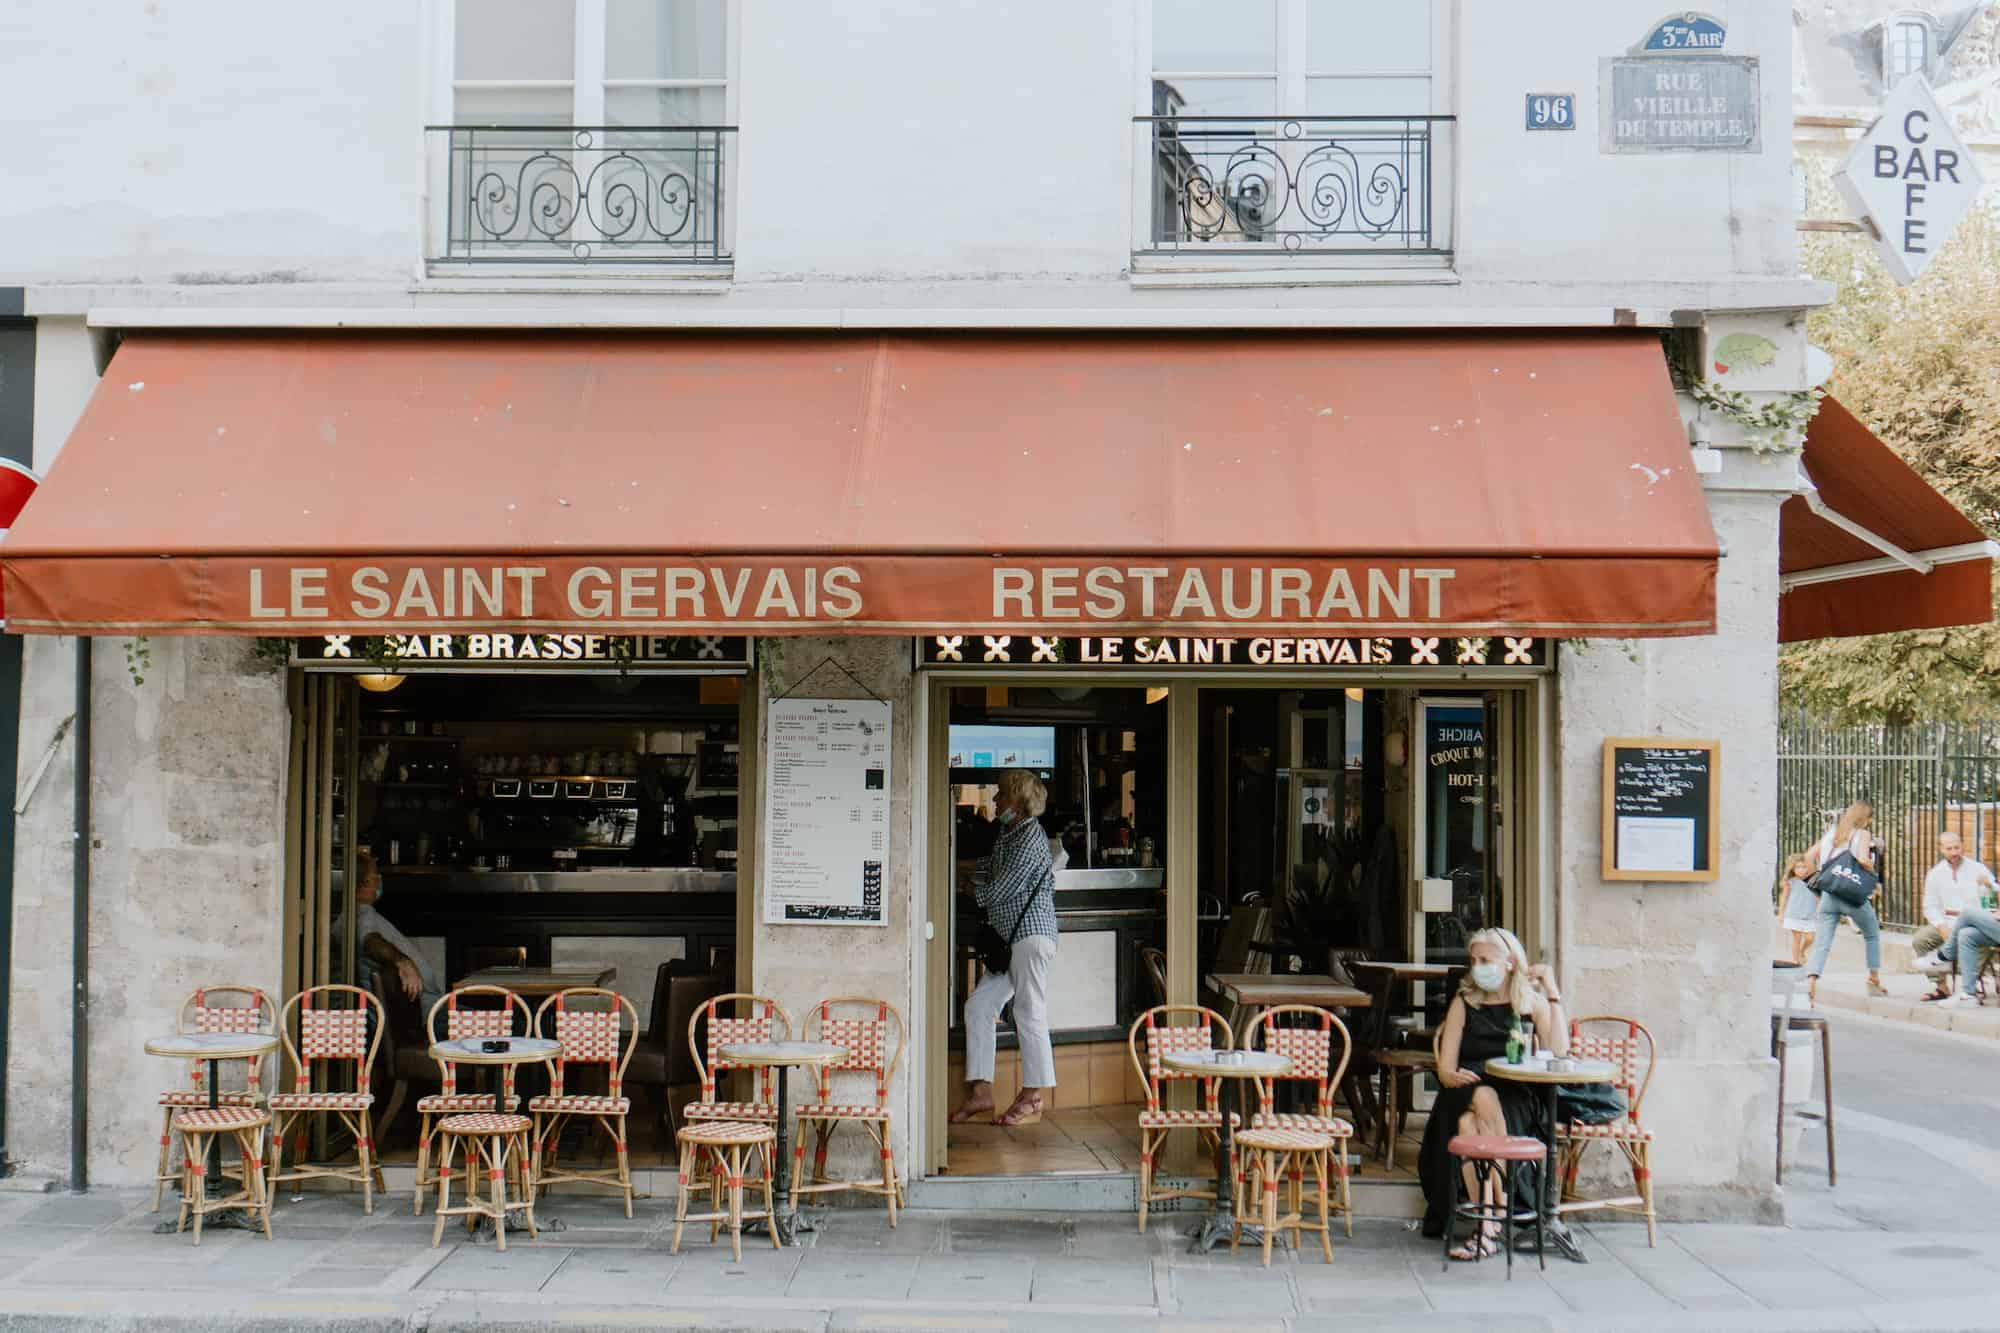 The exterior of a café in Paris. The awning is orange and reads "Le Saint Gervais Restaurant." There is a woman wearing a mask seated at one of the tables in front of the café. There is another woman standing at the bar who is visible inside the café.